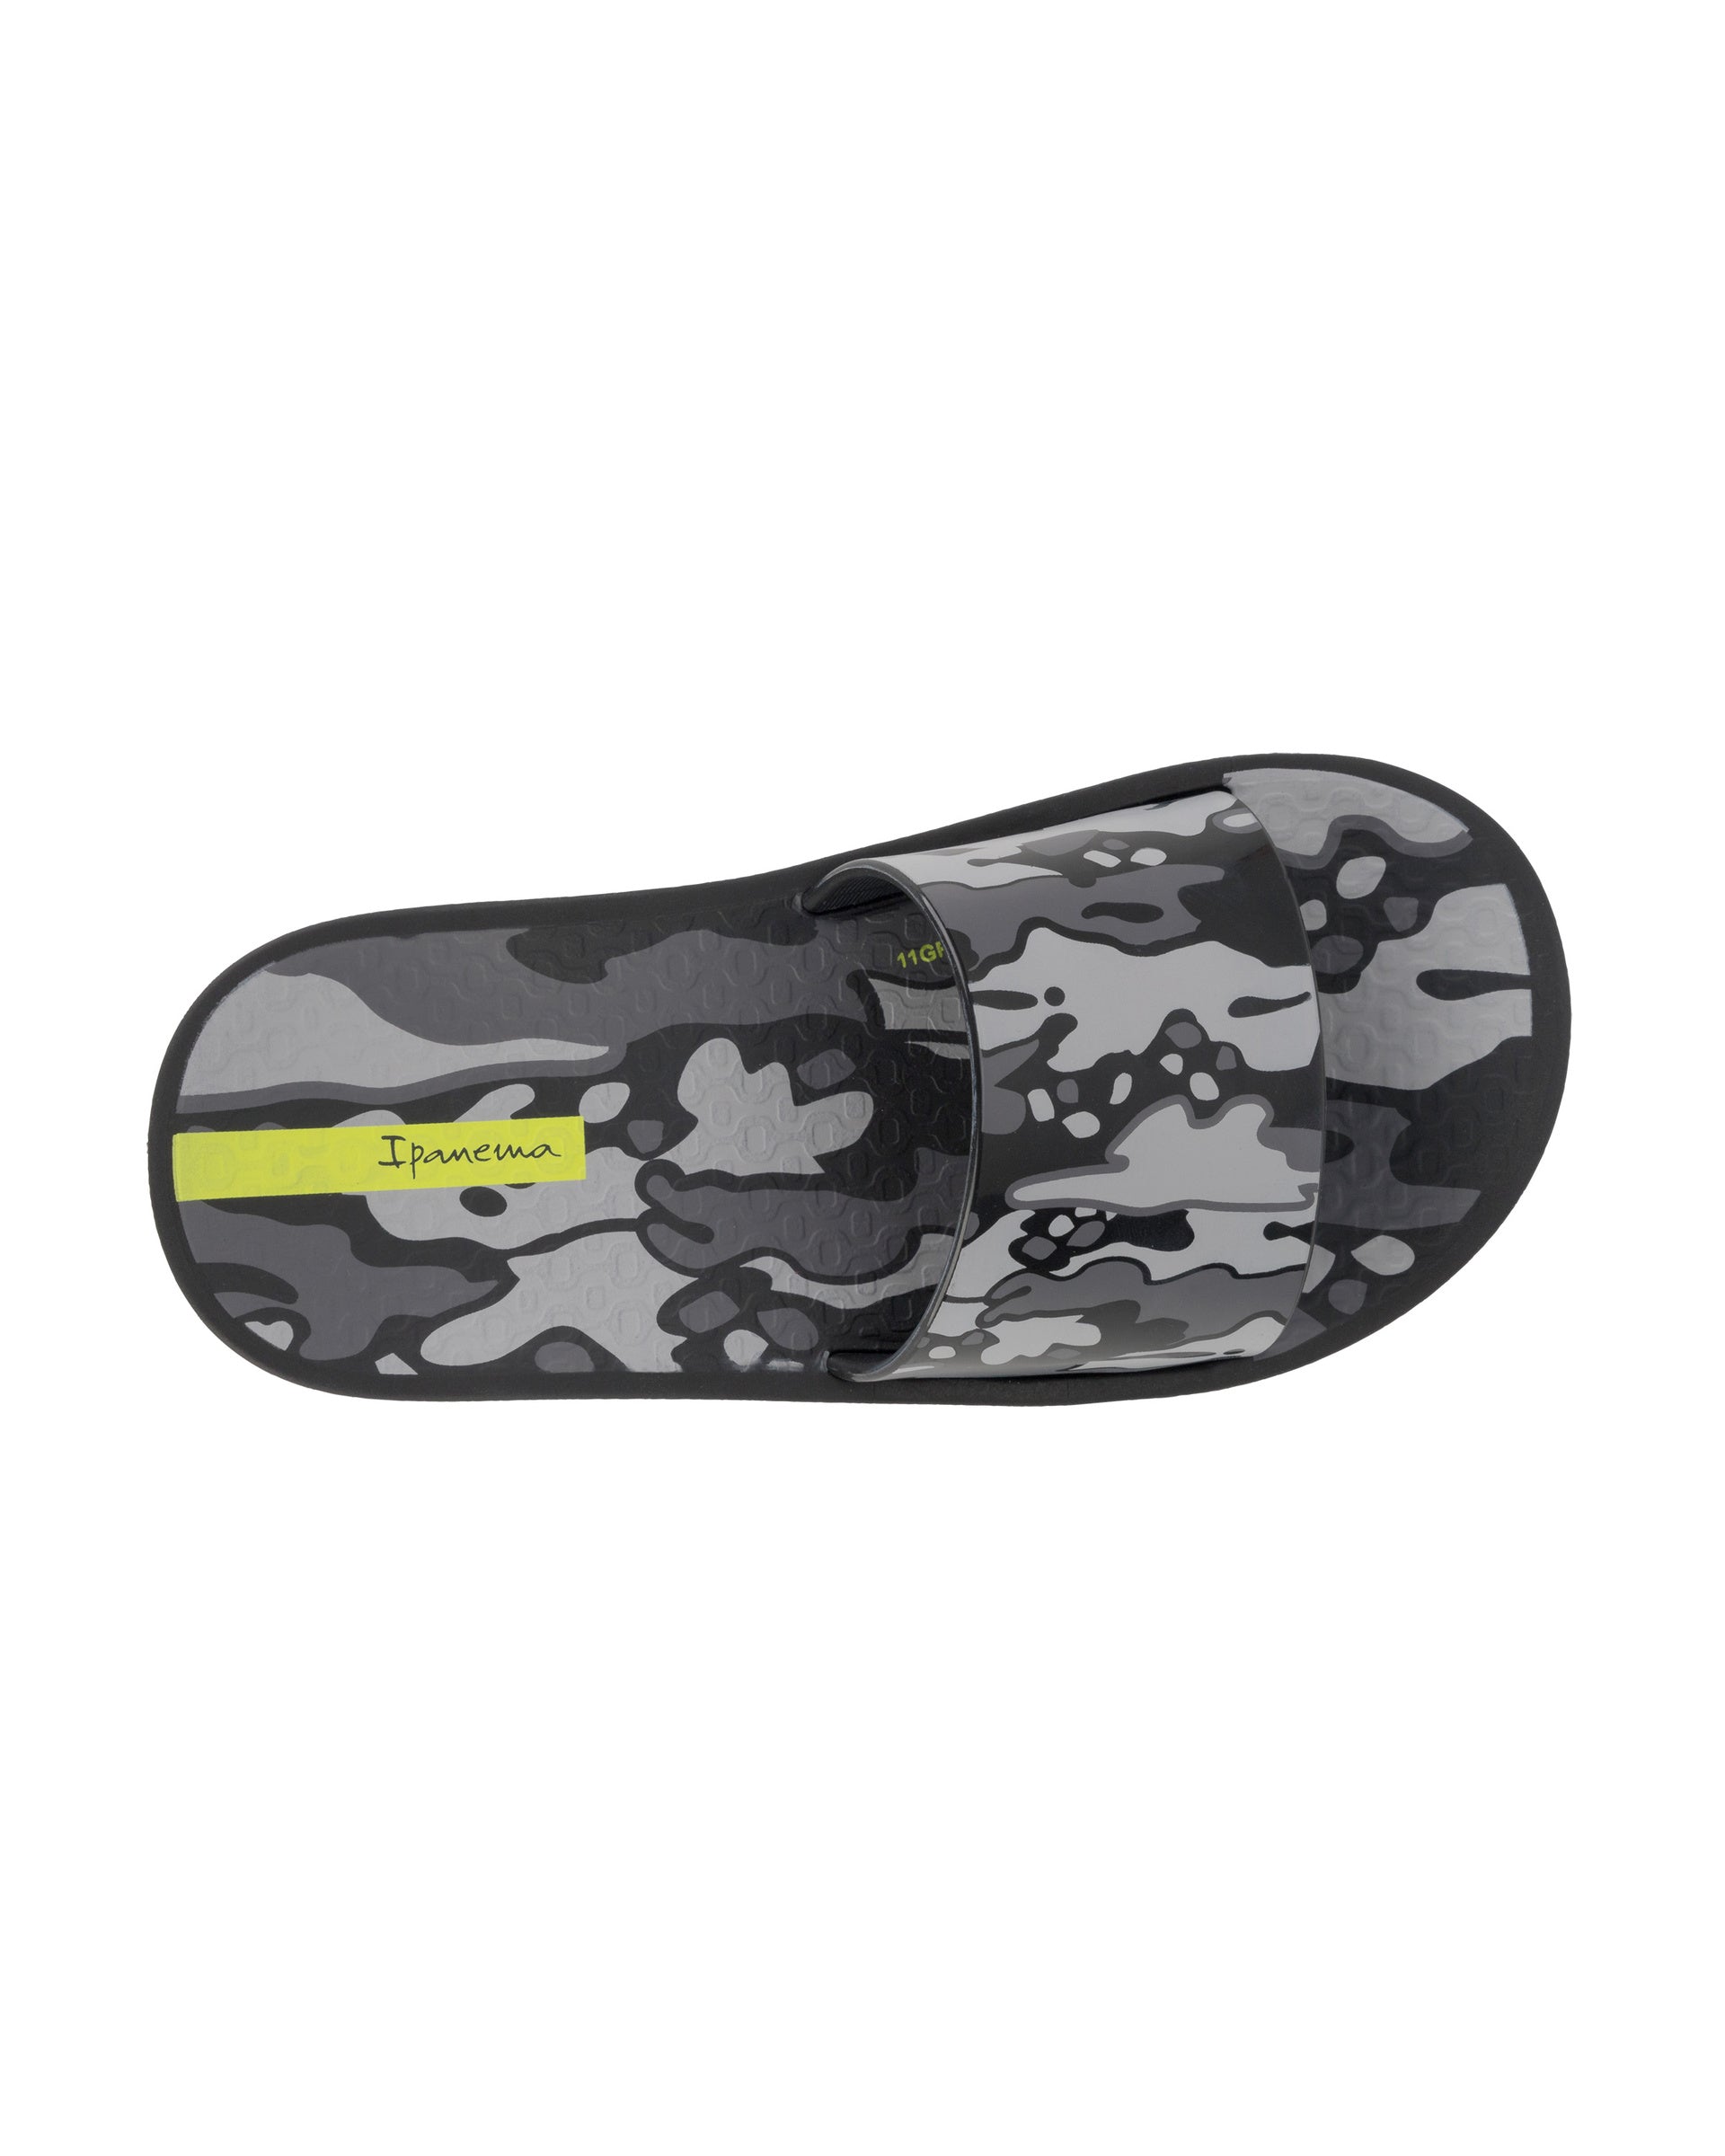 Top view of a black Ipanema Urban kids slide with a camo print on the upper.